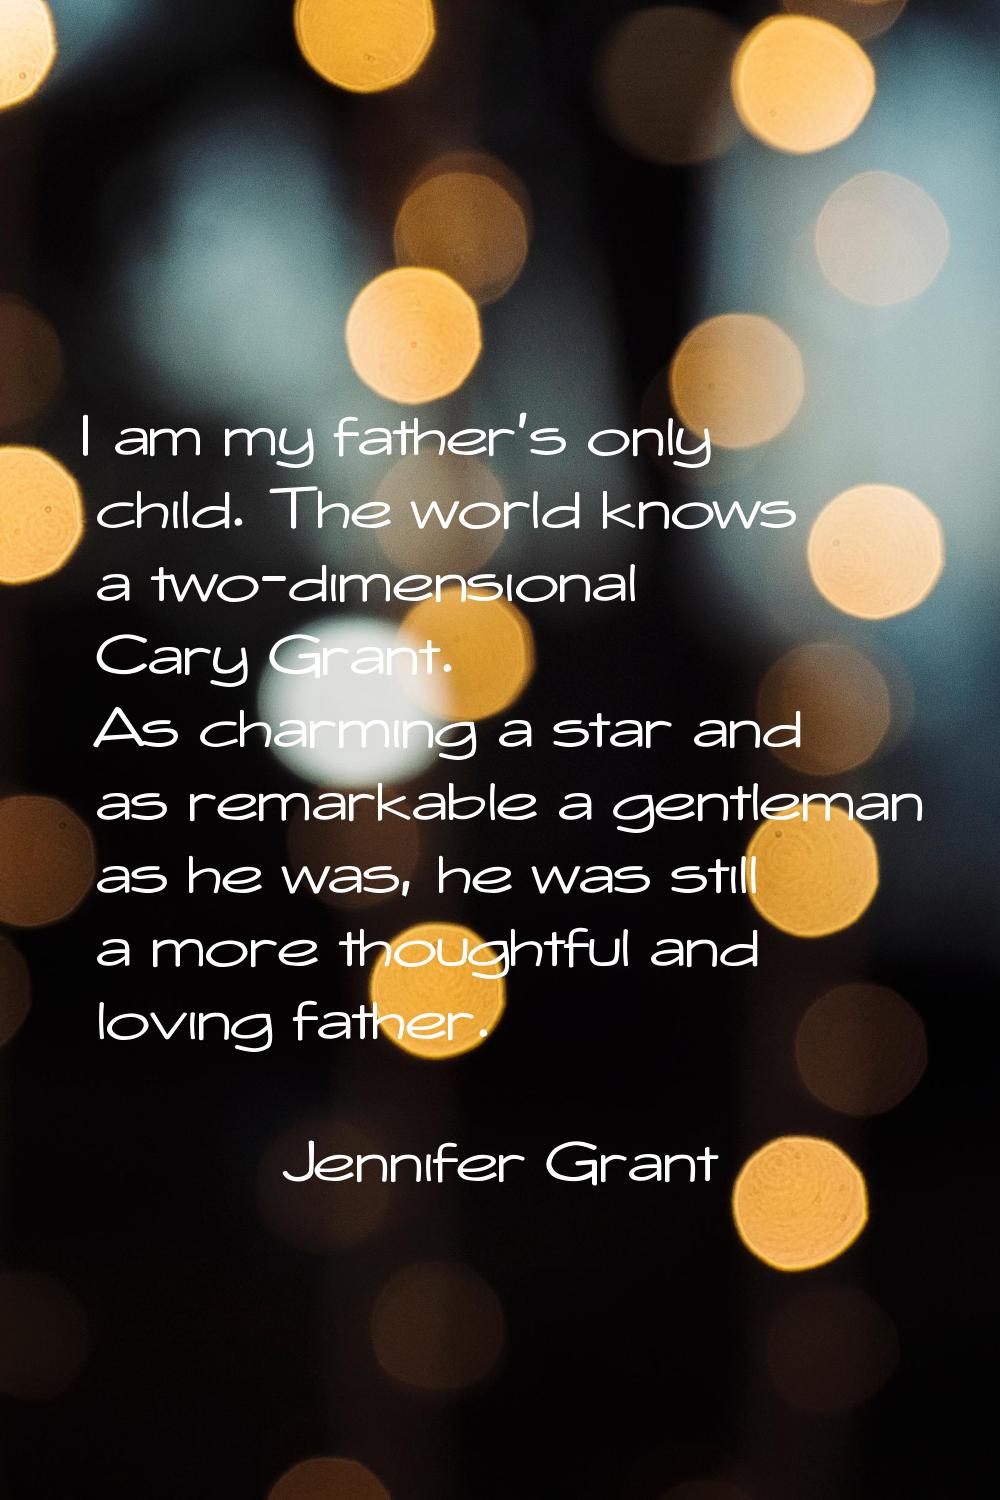 I am my father's only child. The world knows a two-dimensional Cary Grant. As charming a star and a